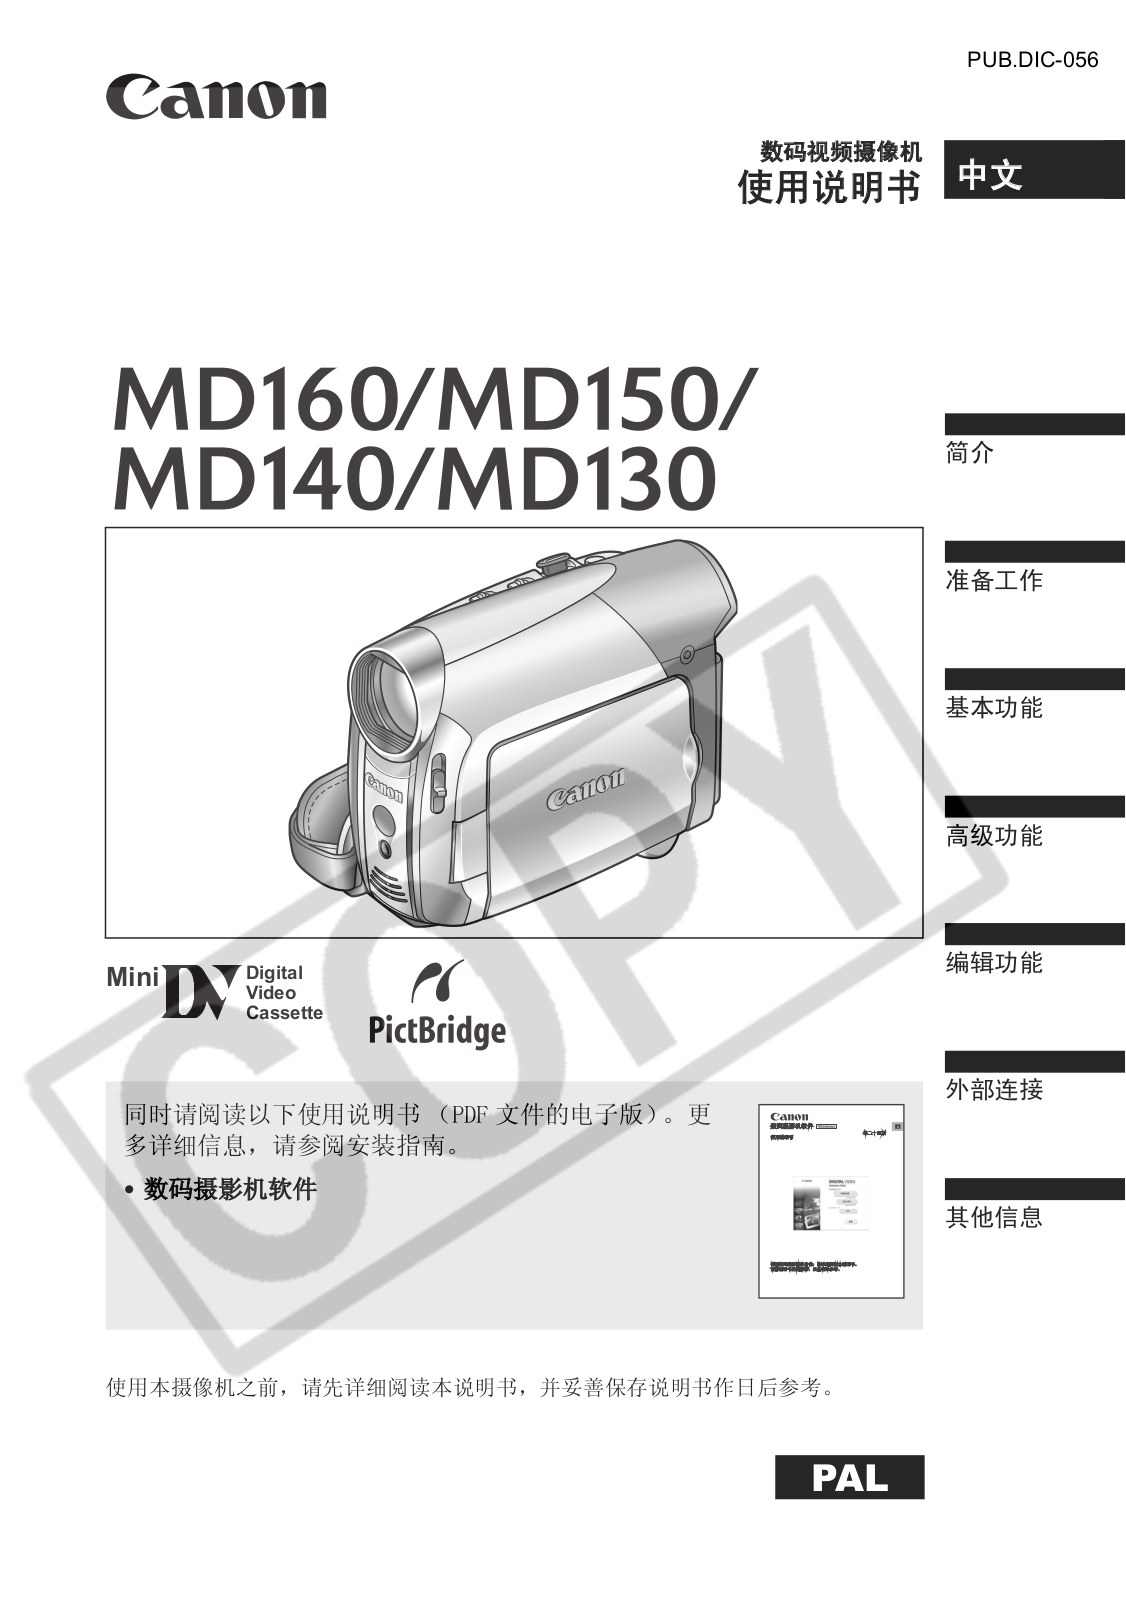 Canon MD160, MD150, MD140, MD130 User Manual